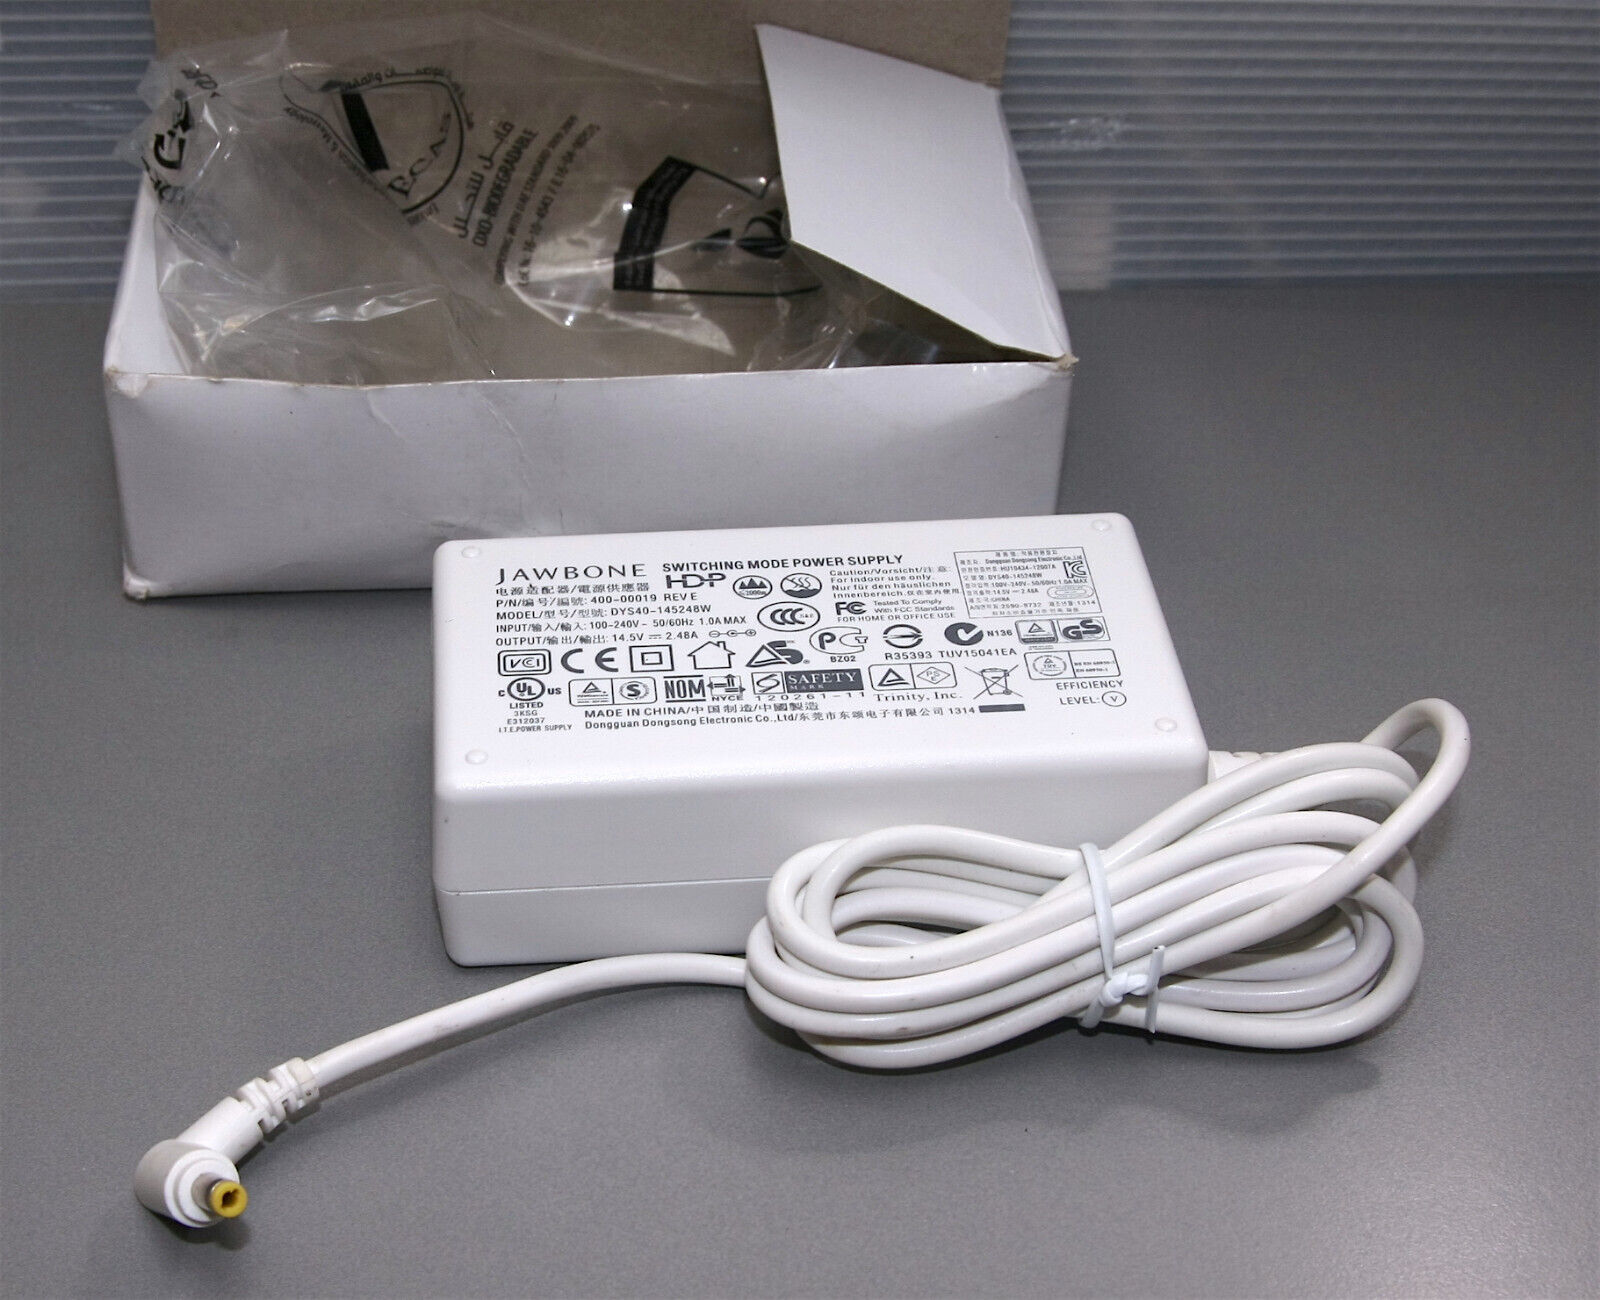 Original NEW NOS Jawbone Power Supply Charger AC Adapter for Big Jambox BT Brand: Jawbone Type: AC/DC Adapter Compat